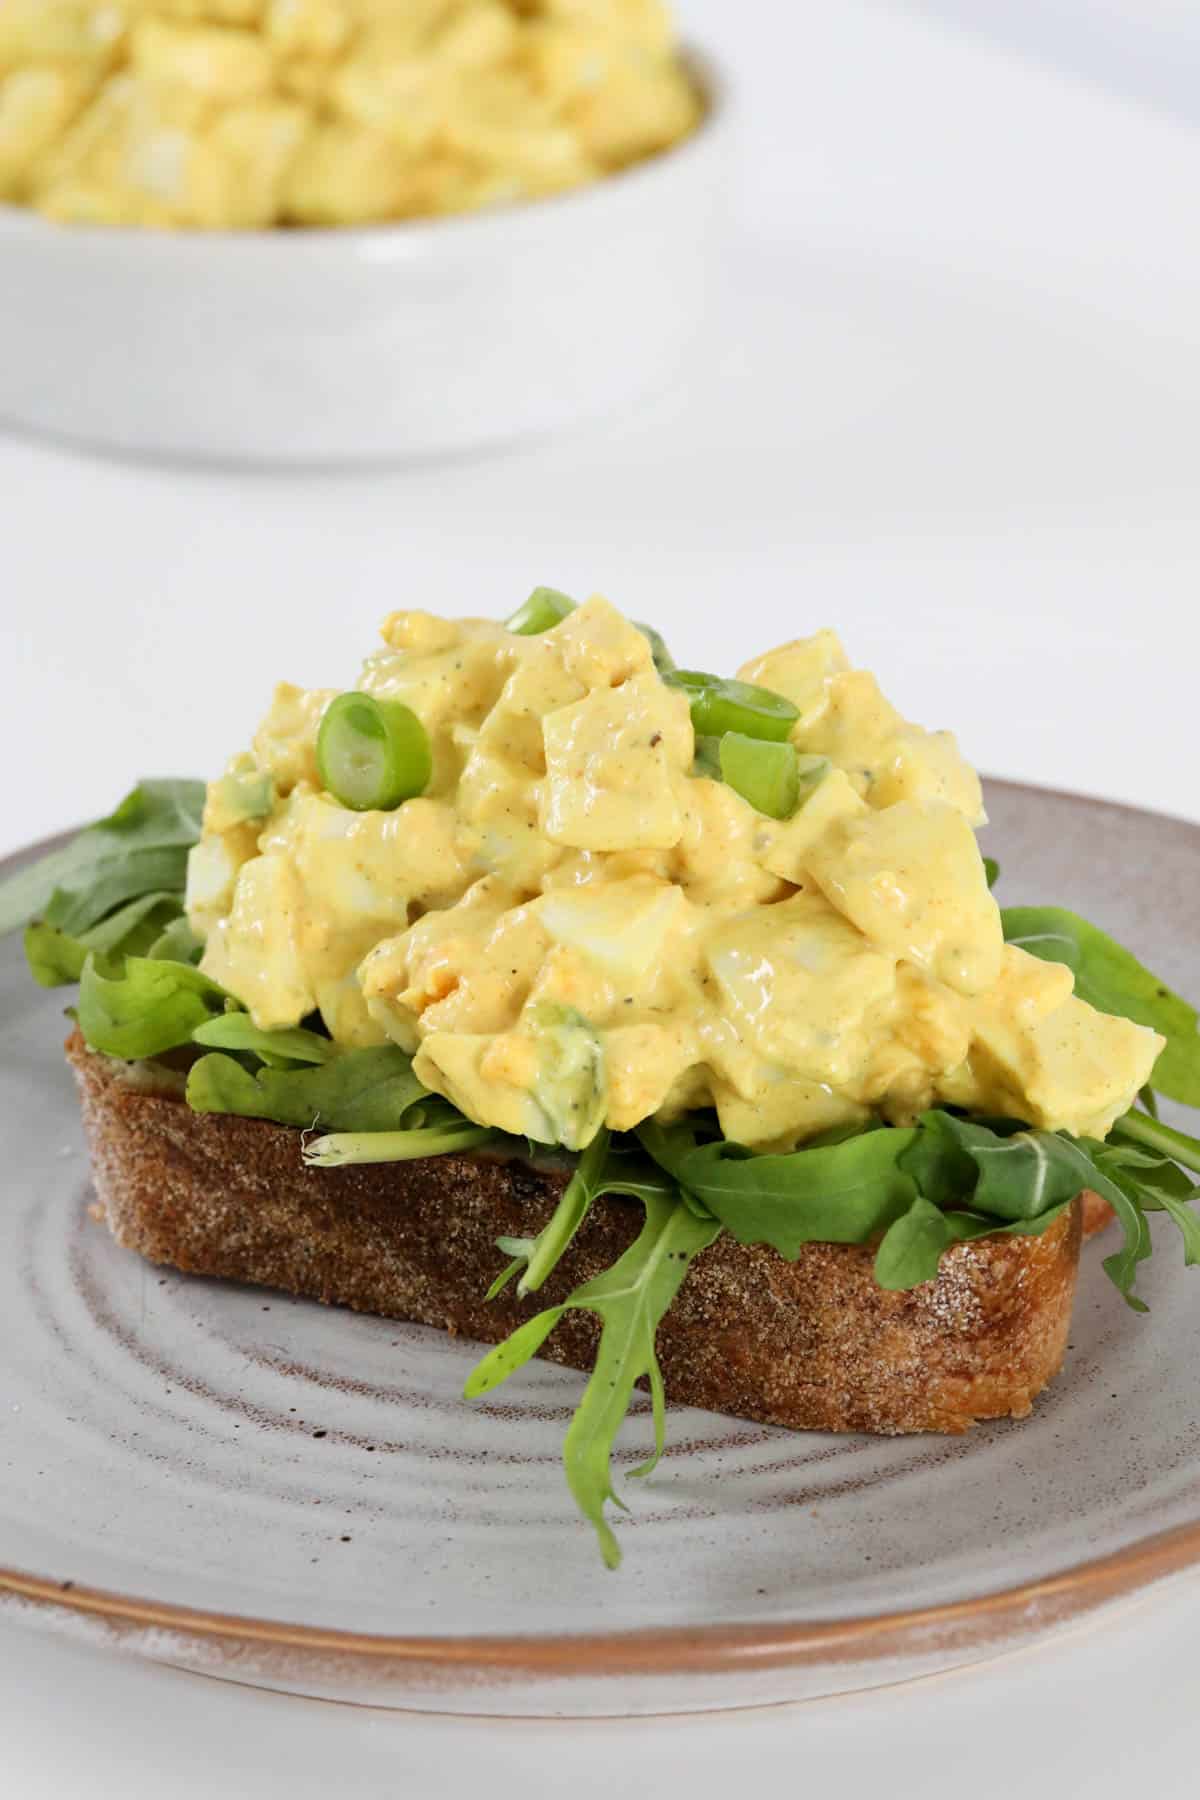 Curried egg salad on a bed of lettuce on top of a slice of rye bread.